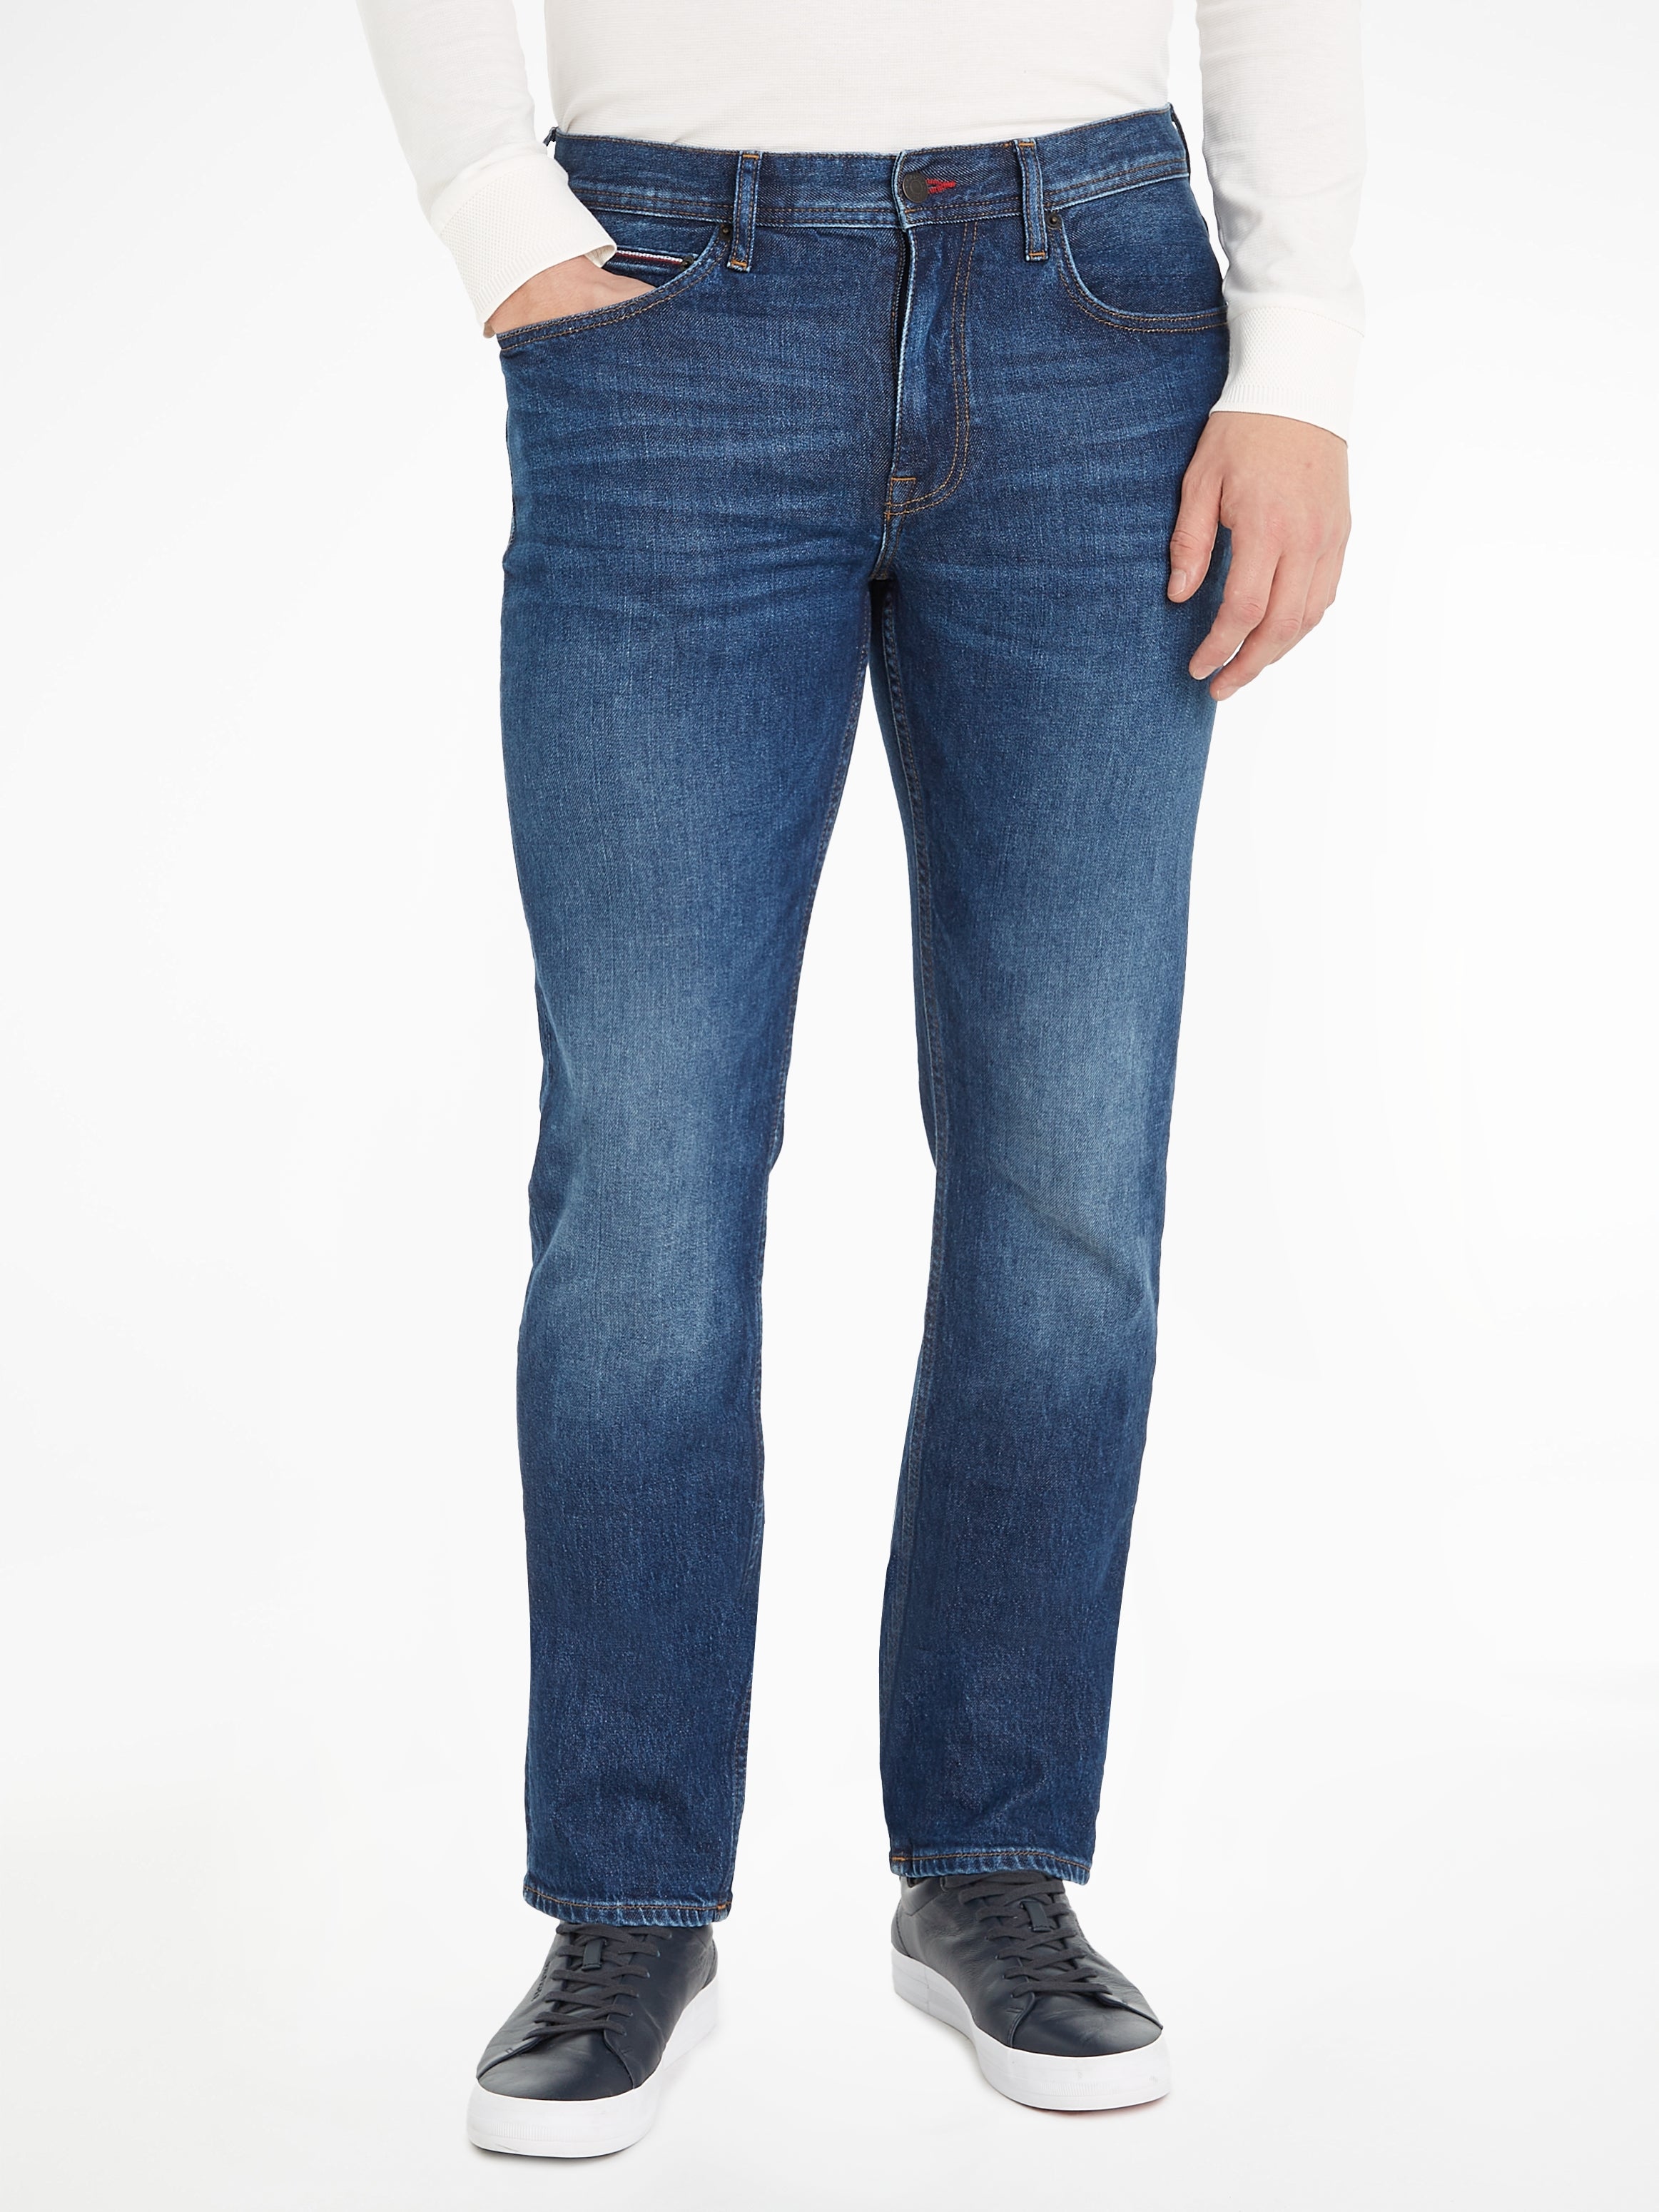 Tommy - Whiskered Straight Men - Galvin for Hilfiger Fitted Denton Blue Jeans